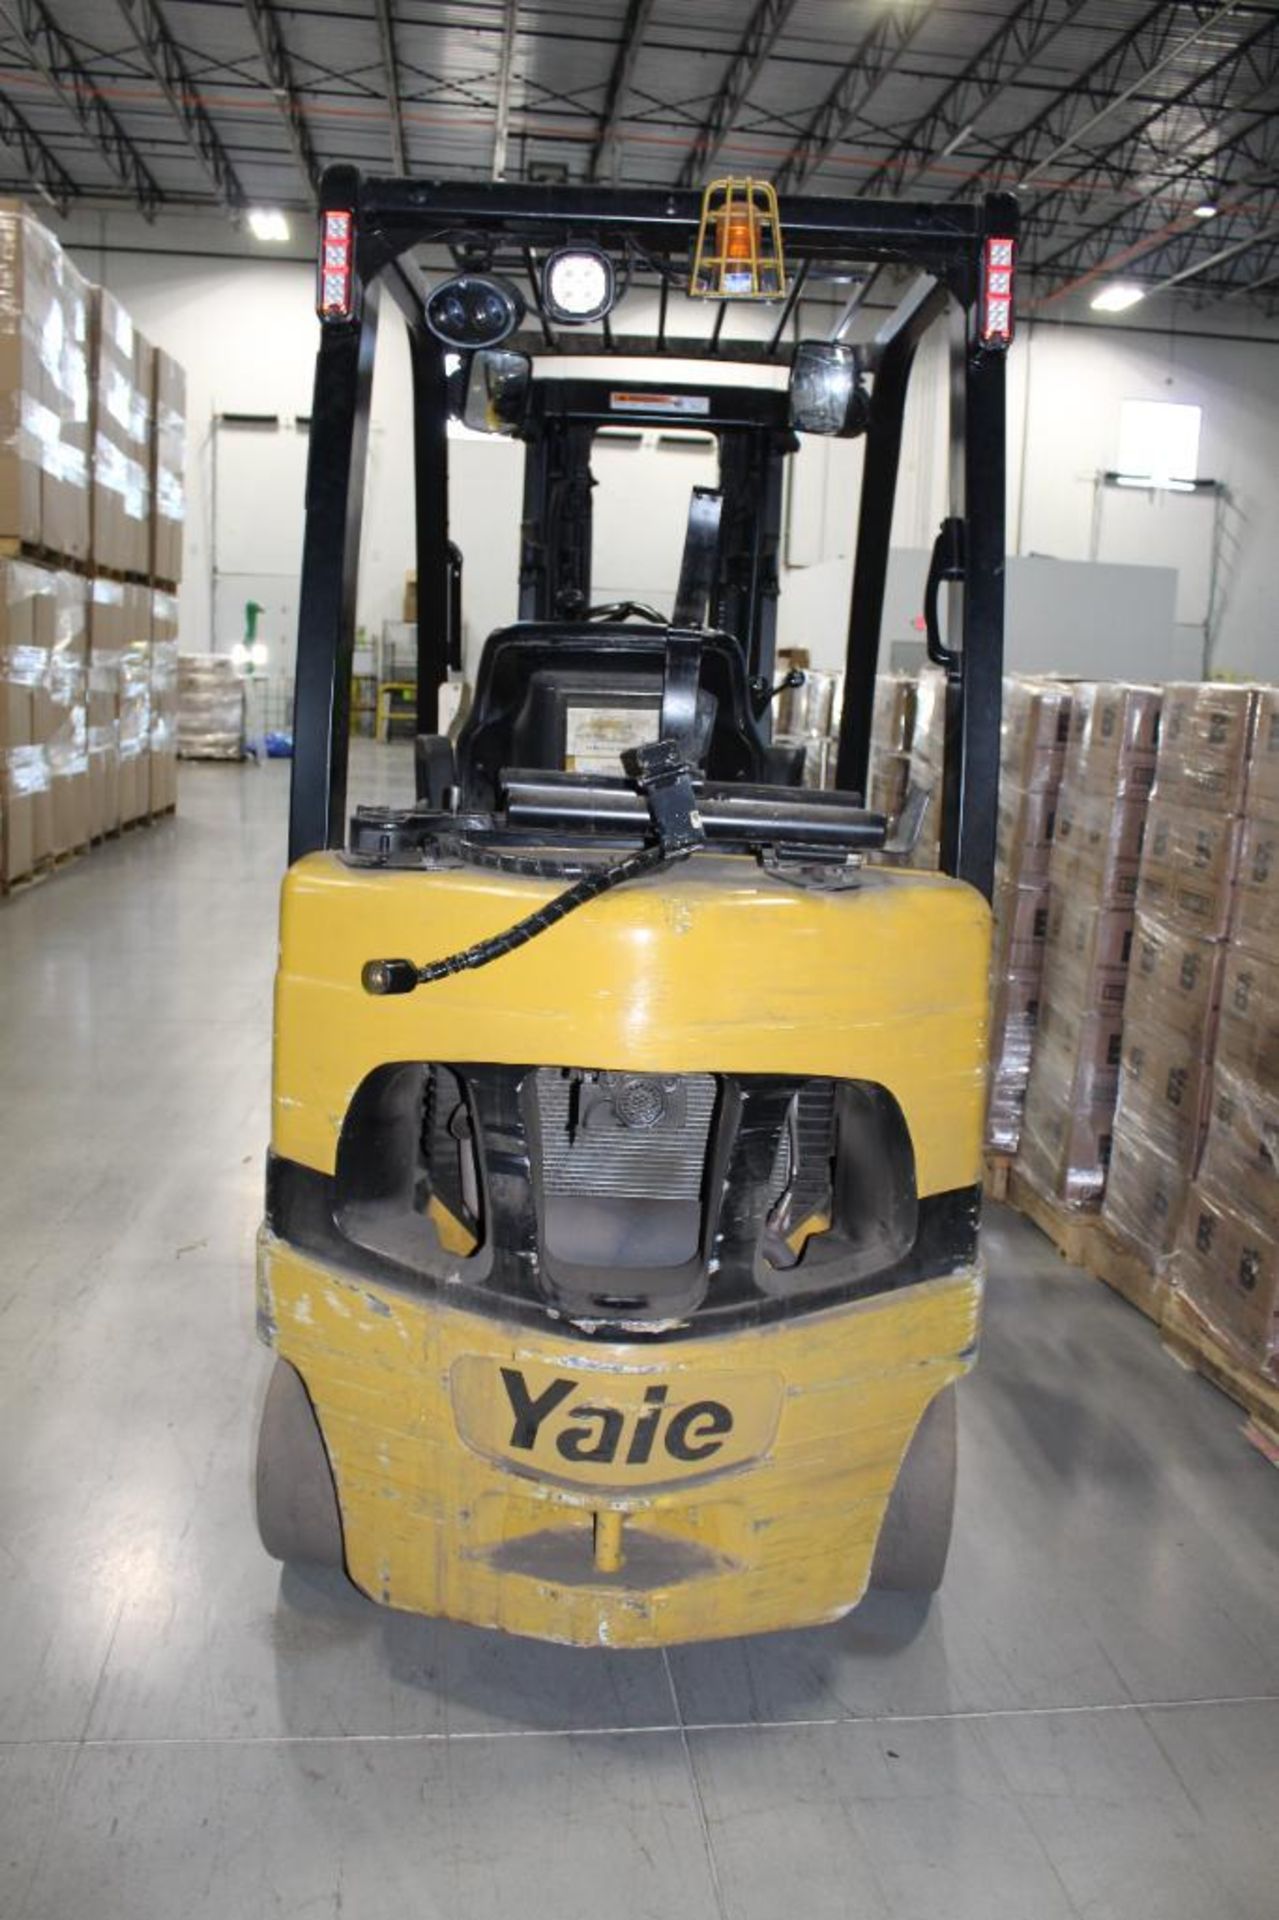 Yale 4800LB Capacity Lift Truck - Delayed Removal - Image 3 of 6